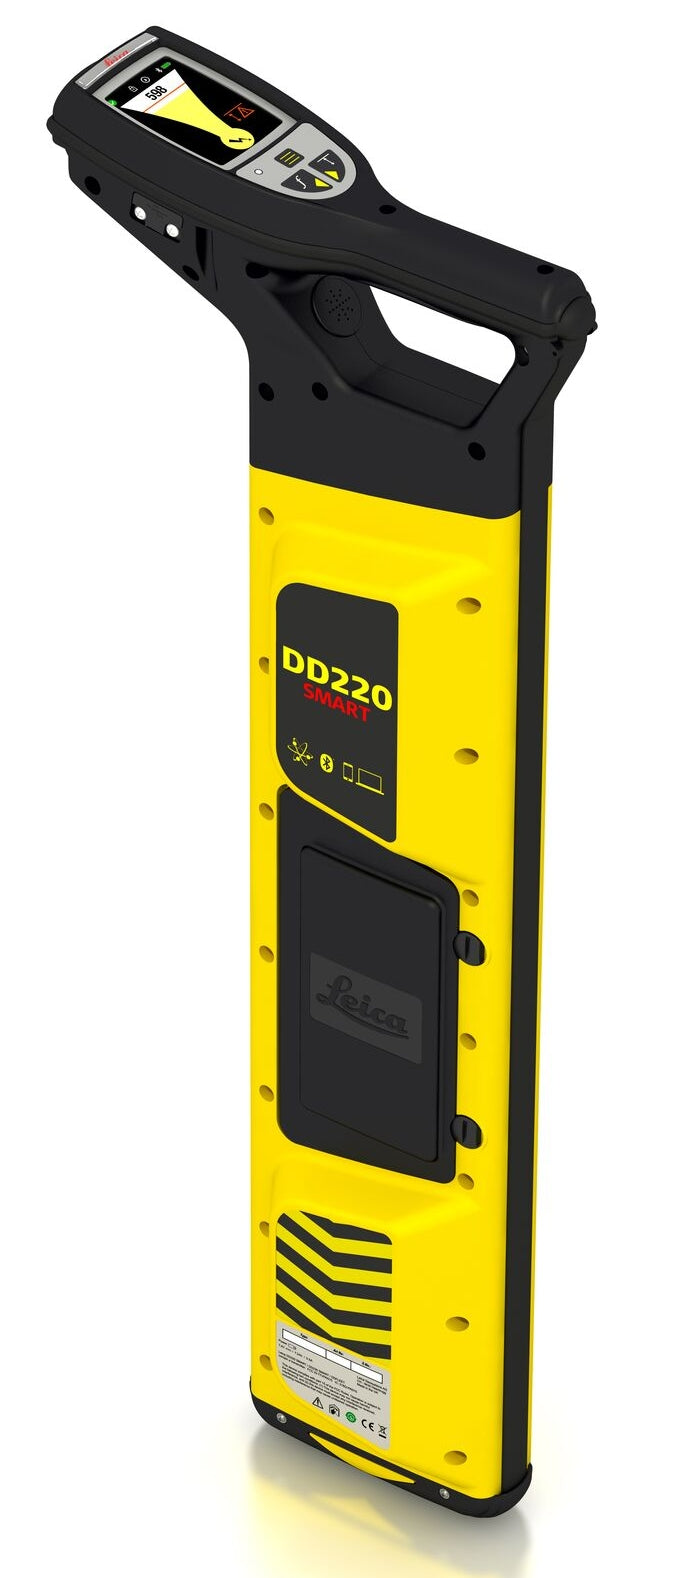 Leica Detect DD220 Utility Locator SMART Package Display VIew